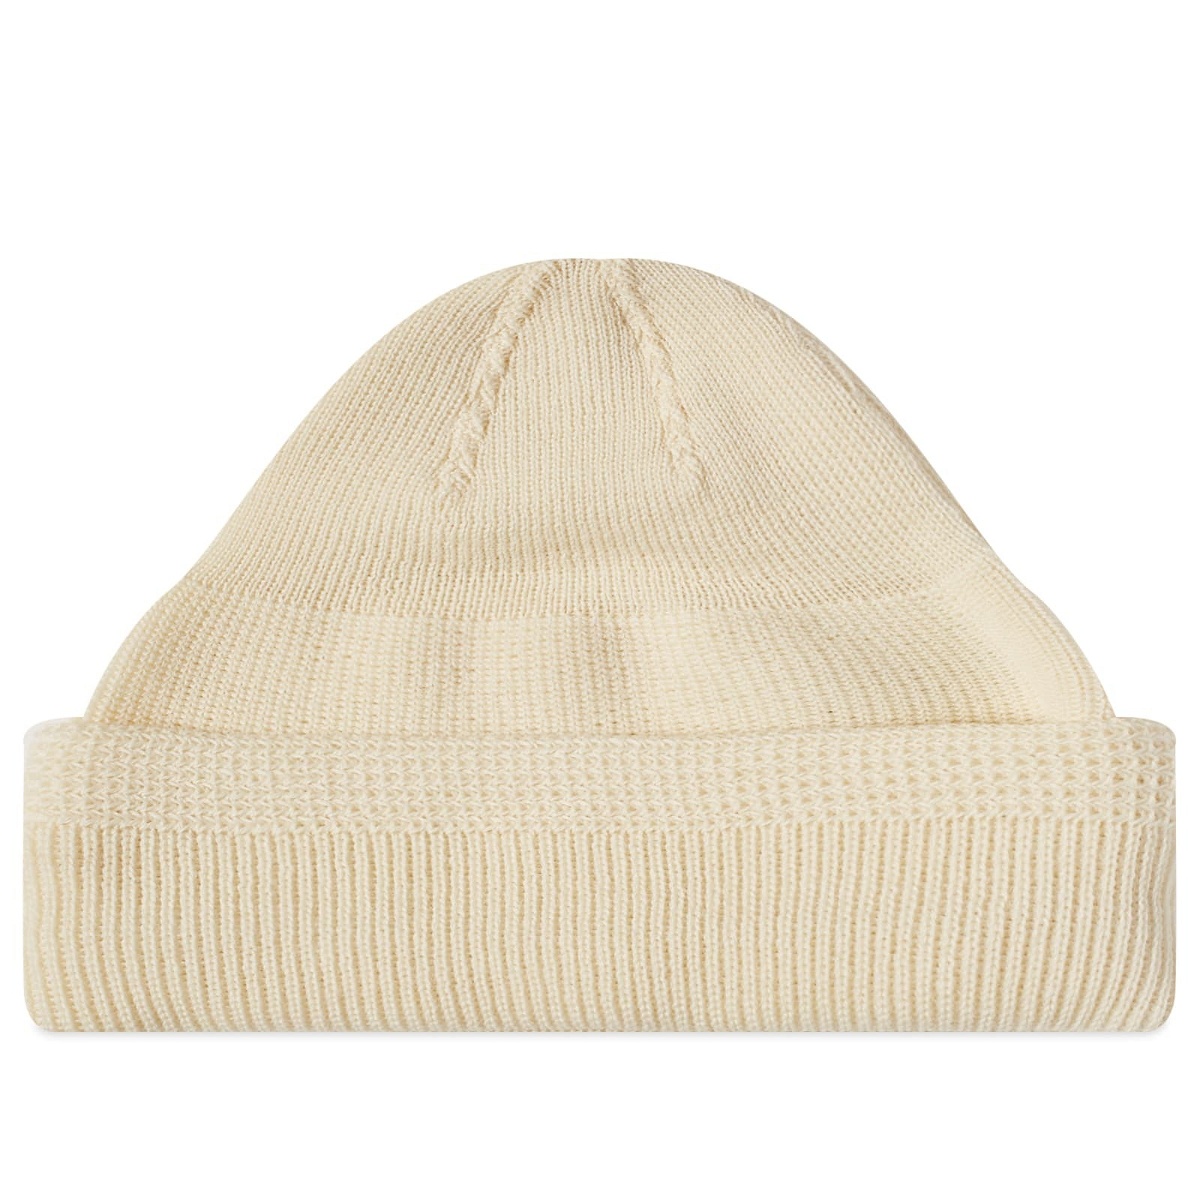 Norse Projects x Le Minor Beanie in Ecru Norse Projects